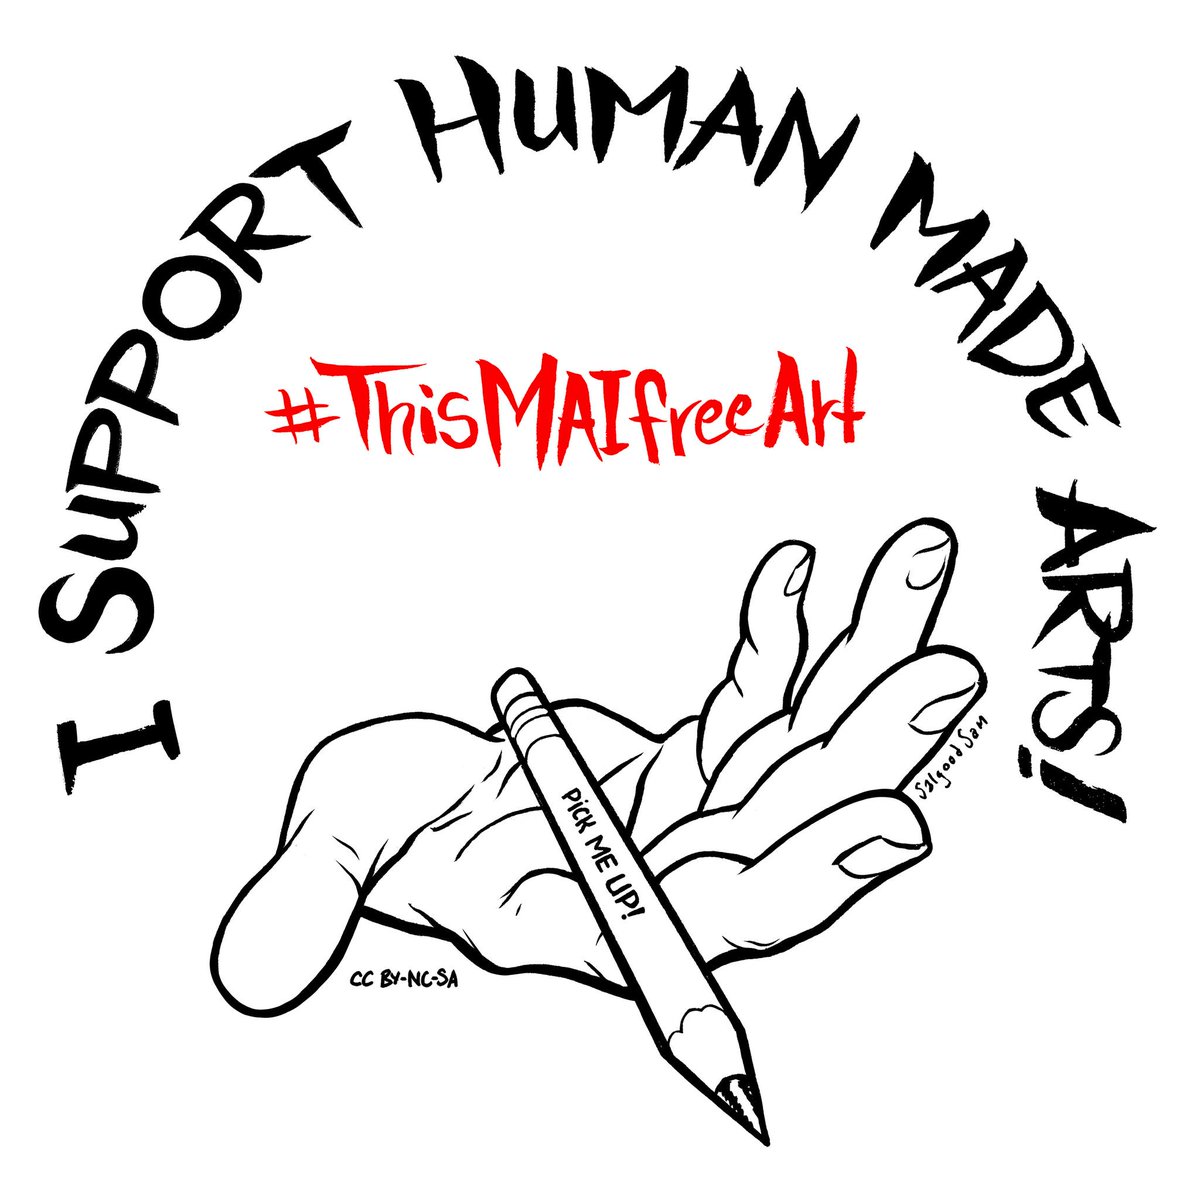 This May, Free Art with us!
We want to free it from exploitative generative AI capture and training without consent or licence! And encourage people’s human right to true self-expression, rather than resorting to gamified prompting engines.
#ThisMAIFreeArt #HumanMadeArts